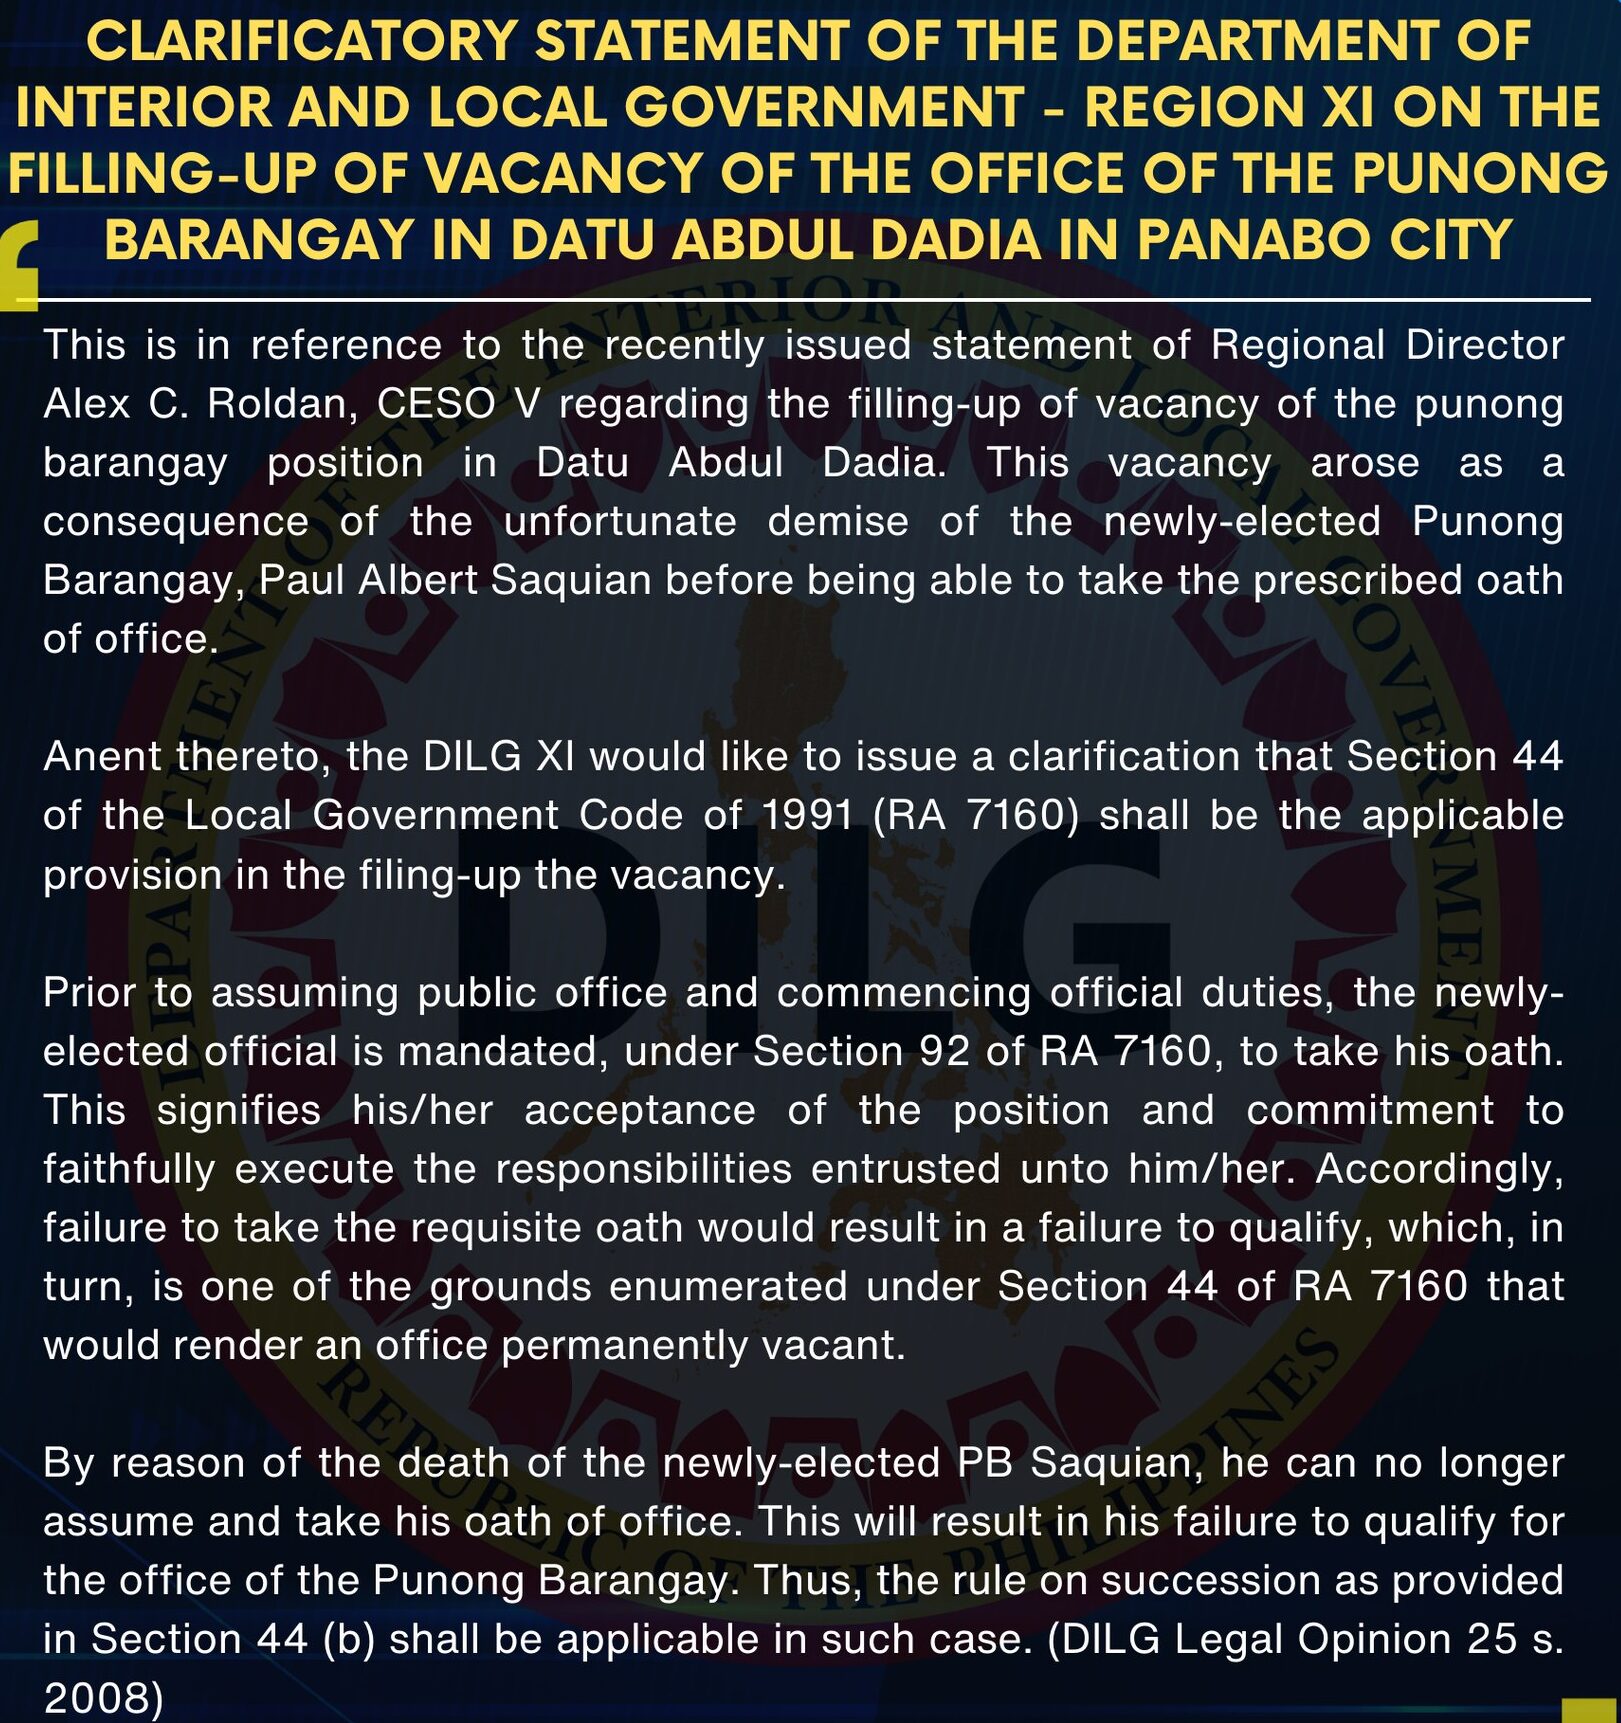 Clarificatory Statement of the Department of the Interior and Local Government-Region XI on the Filling-Up of Vacancy of the Office of the Punong Barangay in Datu Abdul Dadia in Panabo City